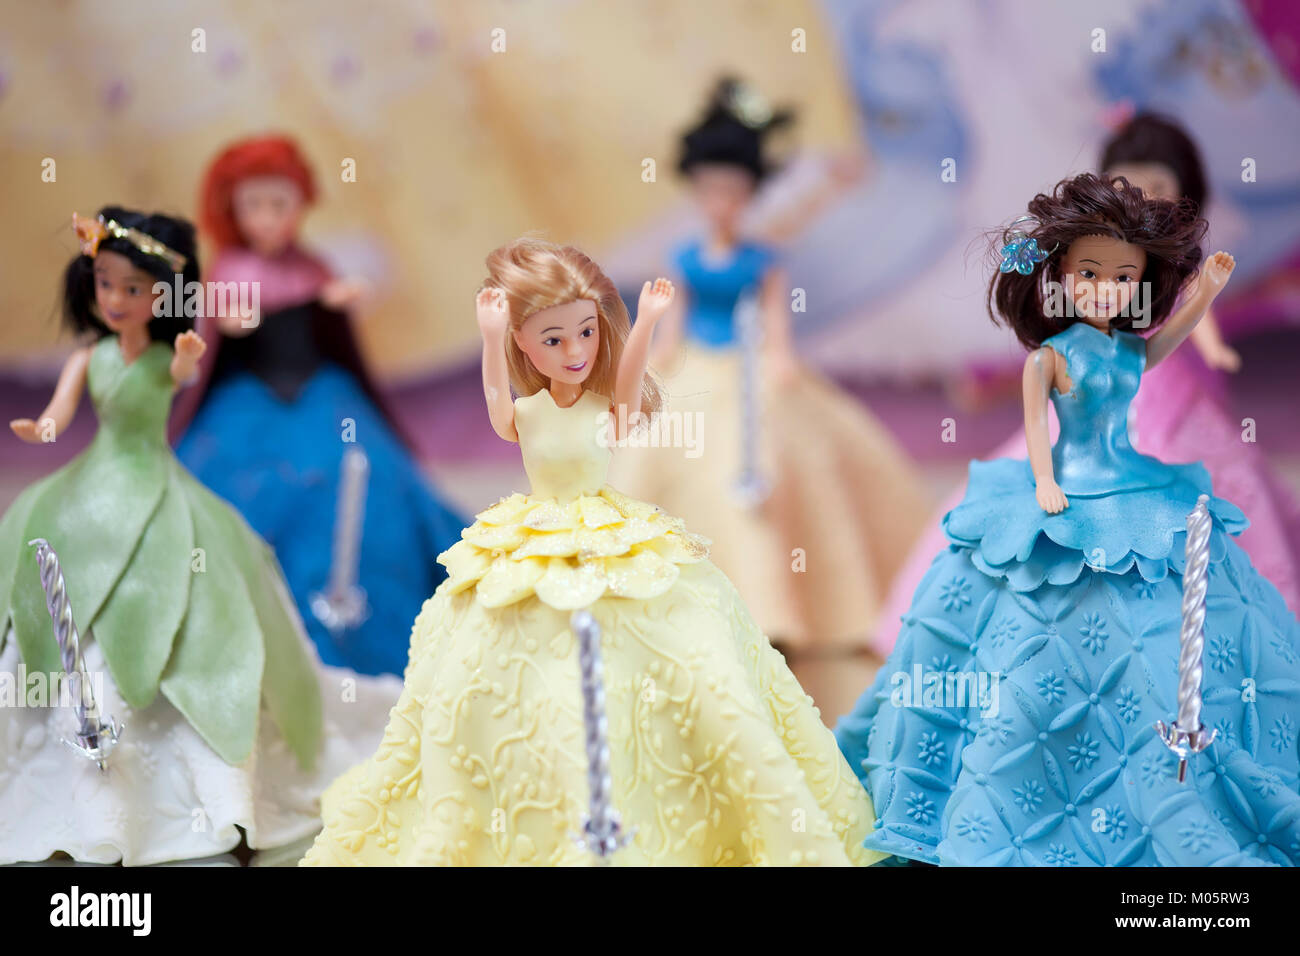 Few disney character dolls used as cake toppers on a birthday cake for a celebration Stock Photo